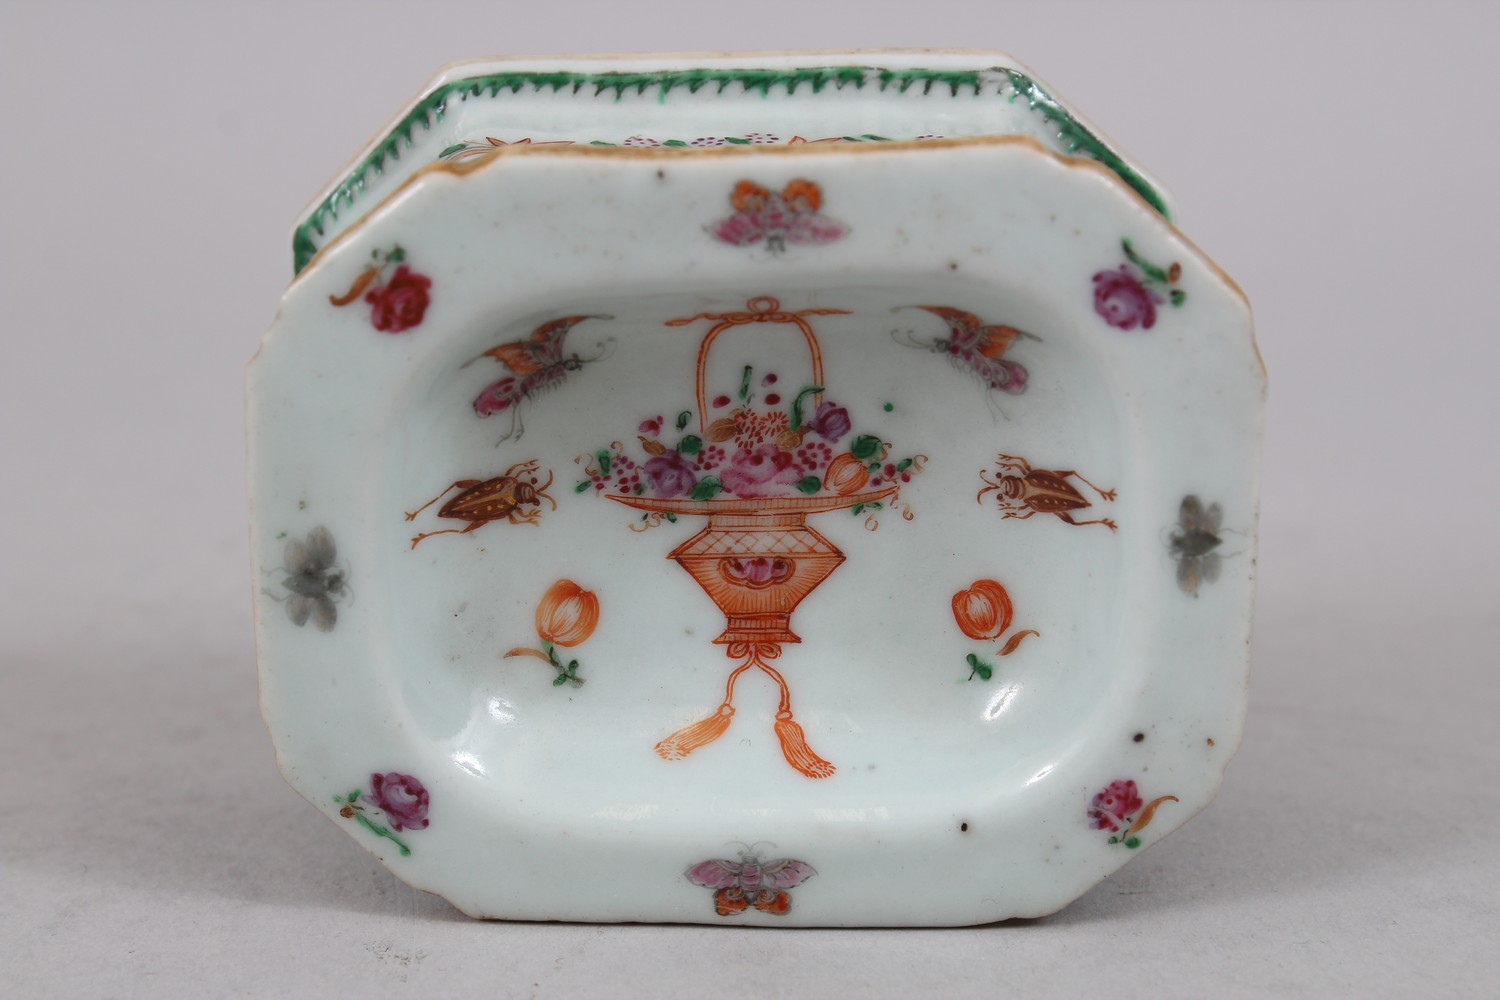 A CHINESE 18TH CENTURY FAMILLE ROSE PORCELAIN SALT COLLER / DISH, decorated with scenes of floral - Image 2 of 4